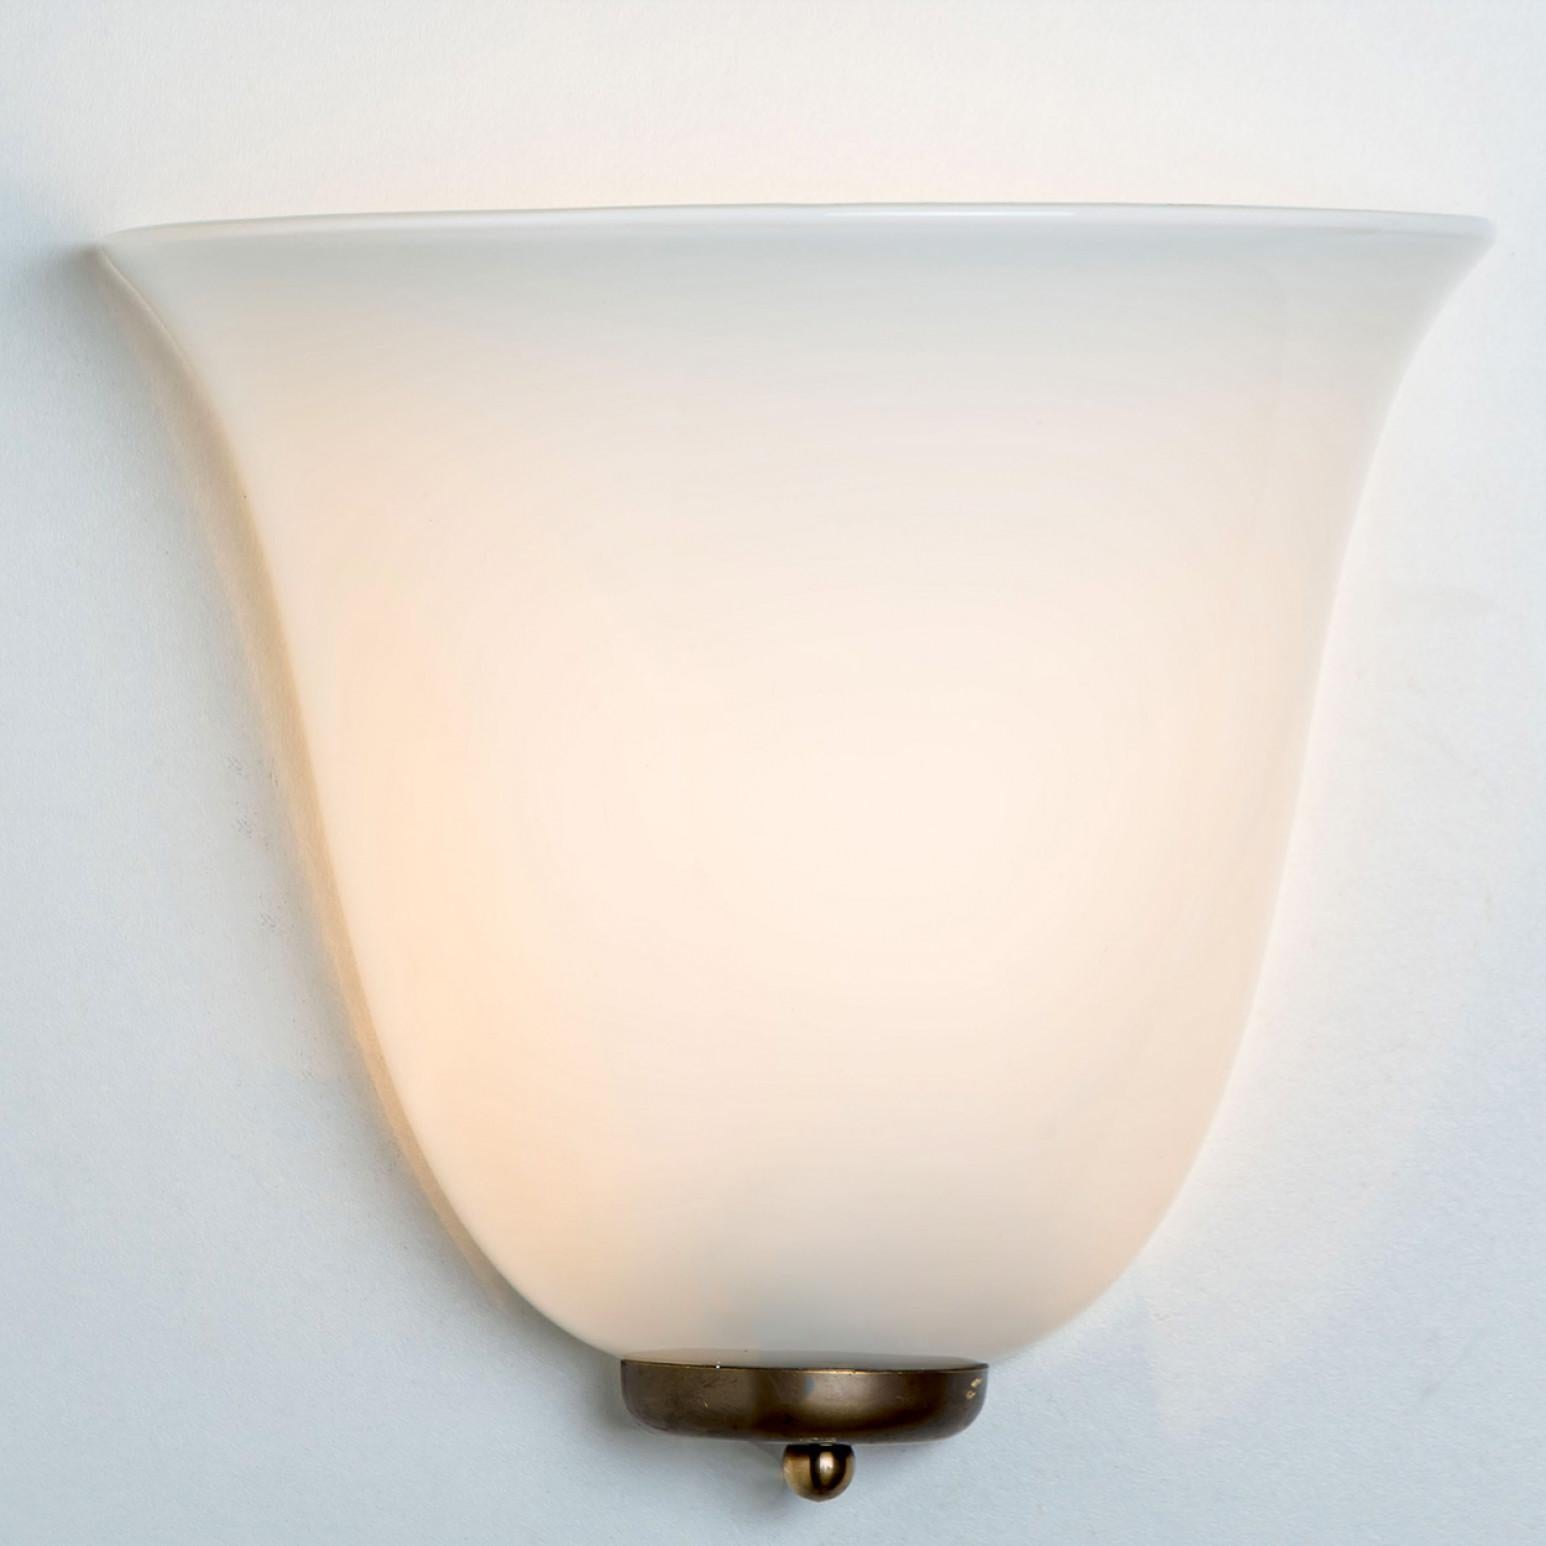 Other 1 of 6 Opal Wall Lights by Doria Leuchten, 1960s For Sale